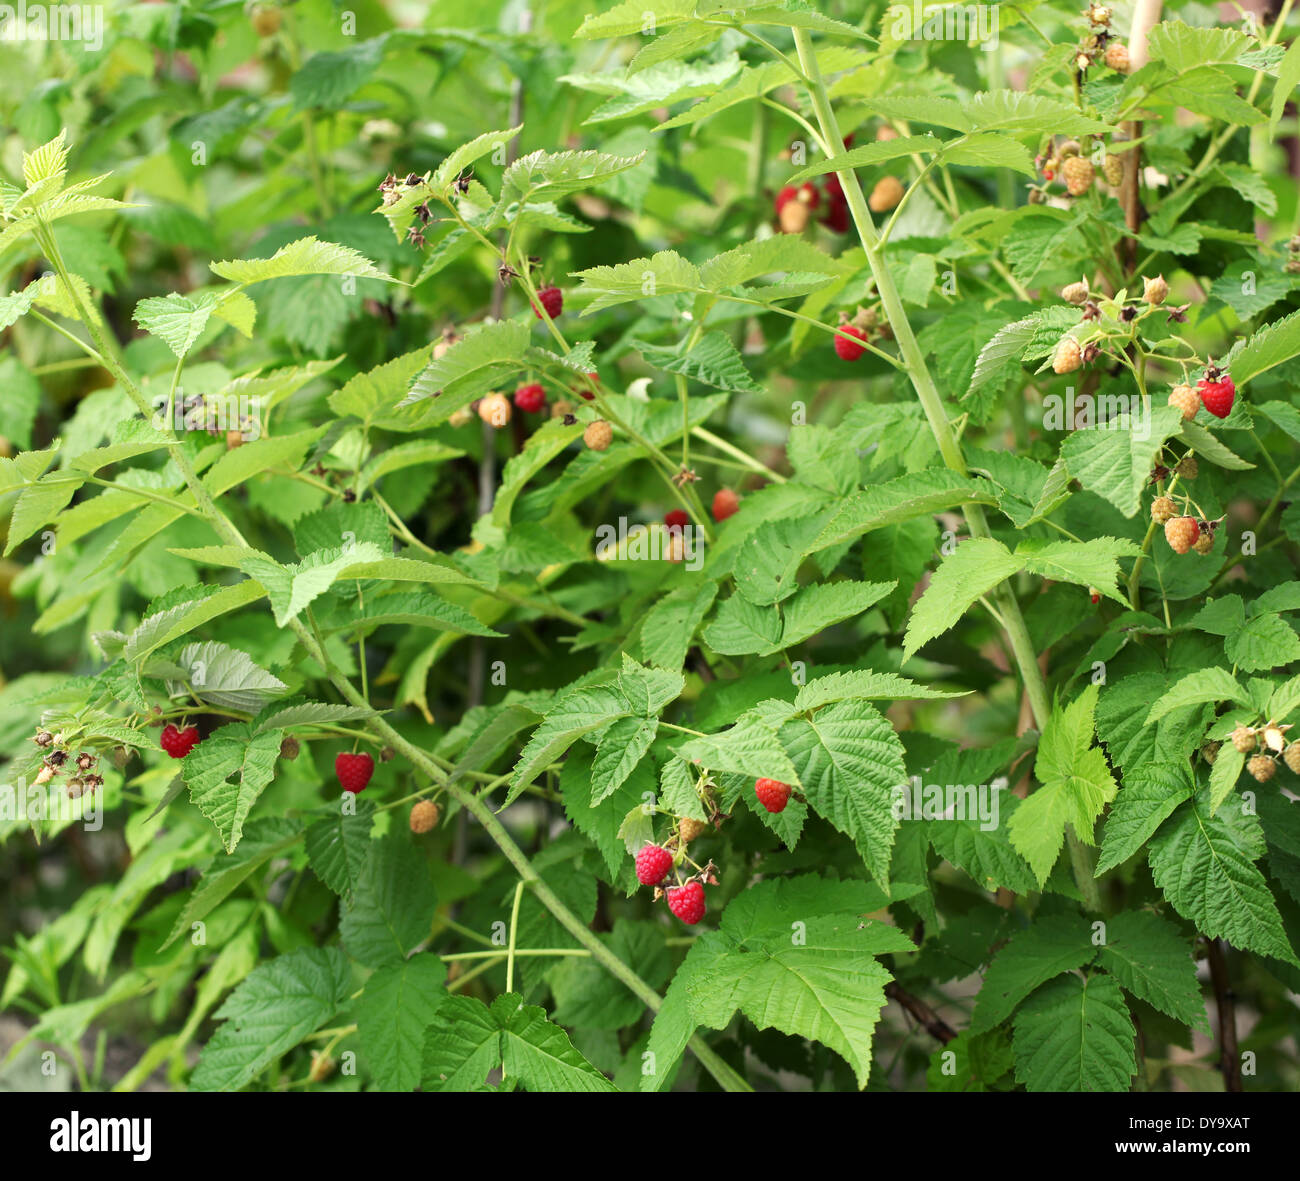 Shrubs of raspberry in the garden with ripe berries on them. Stock Photo